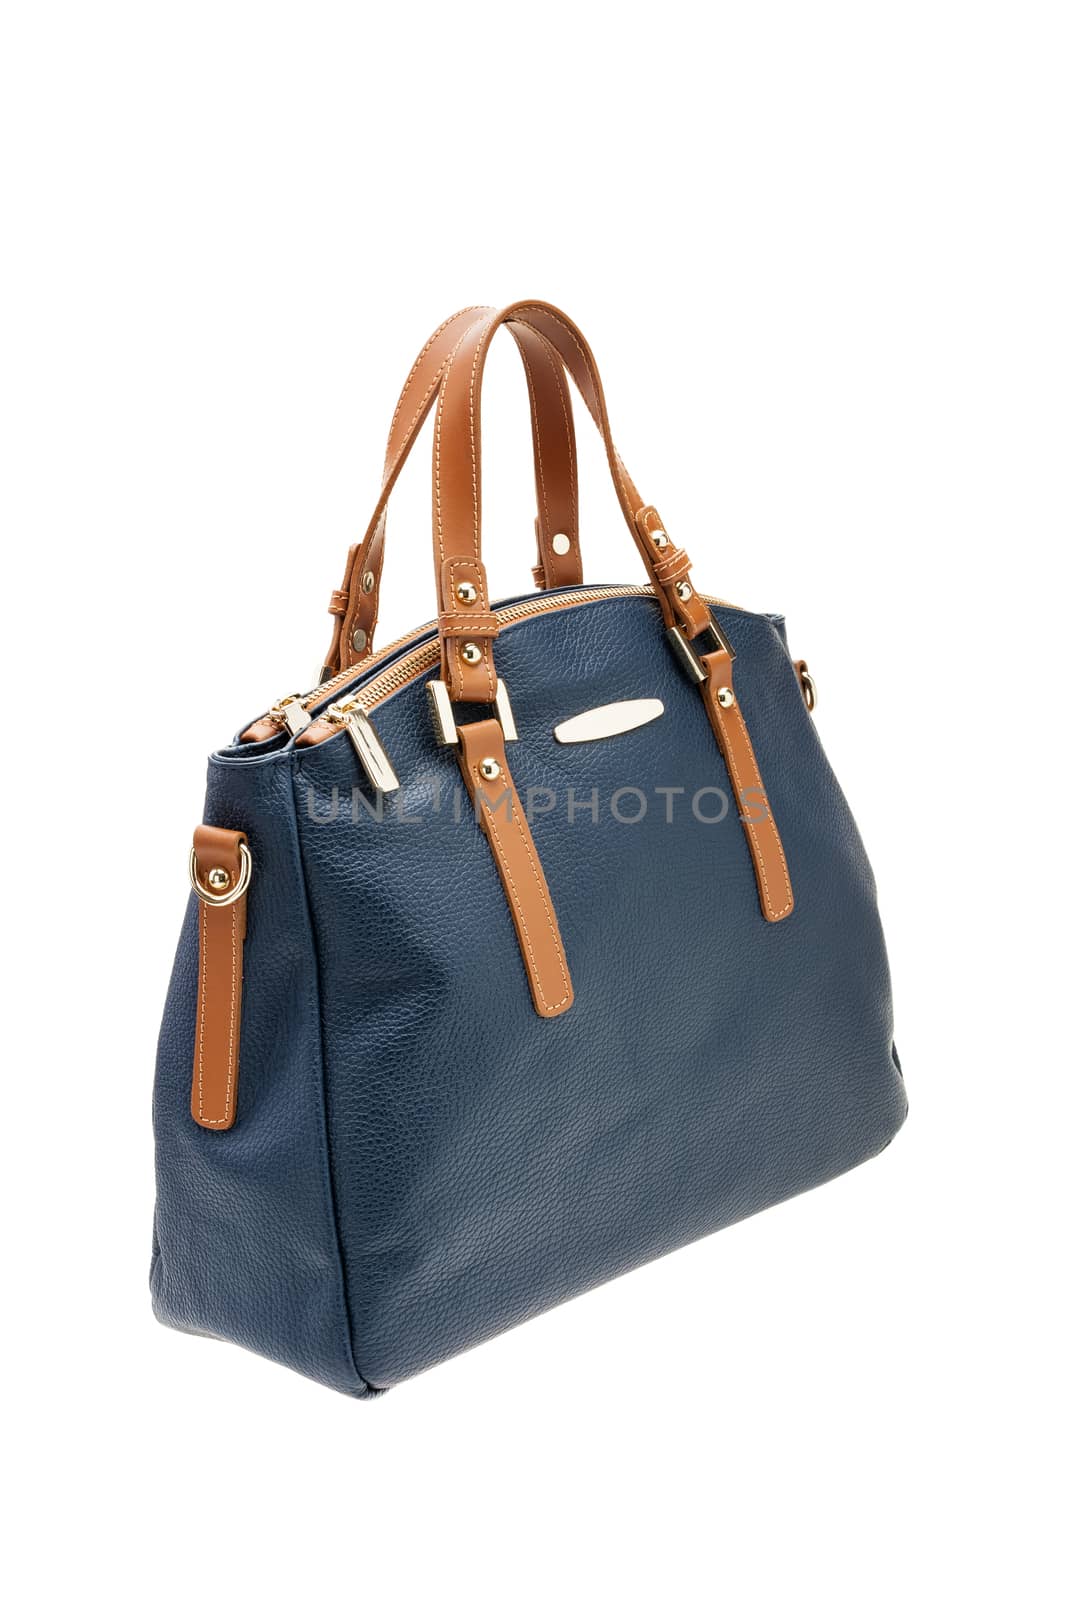 New dark blue womens bag isolated on white background.